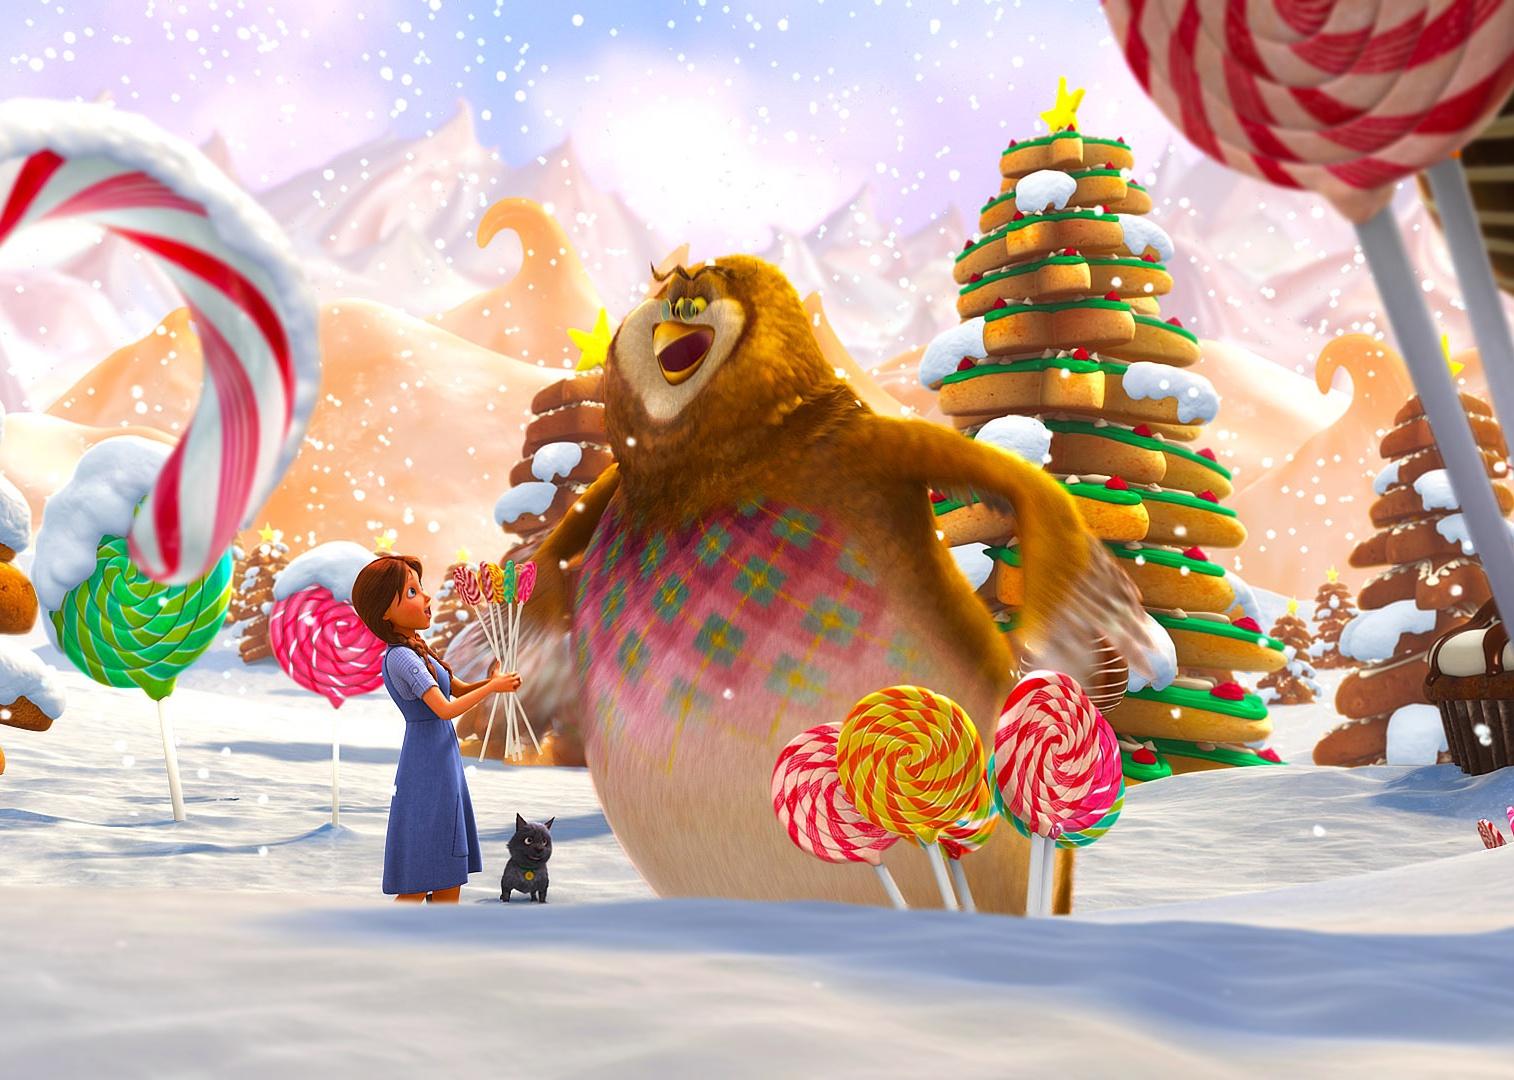 Animated scene of a little girl and a giant bird surrounded by candy